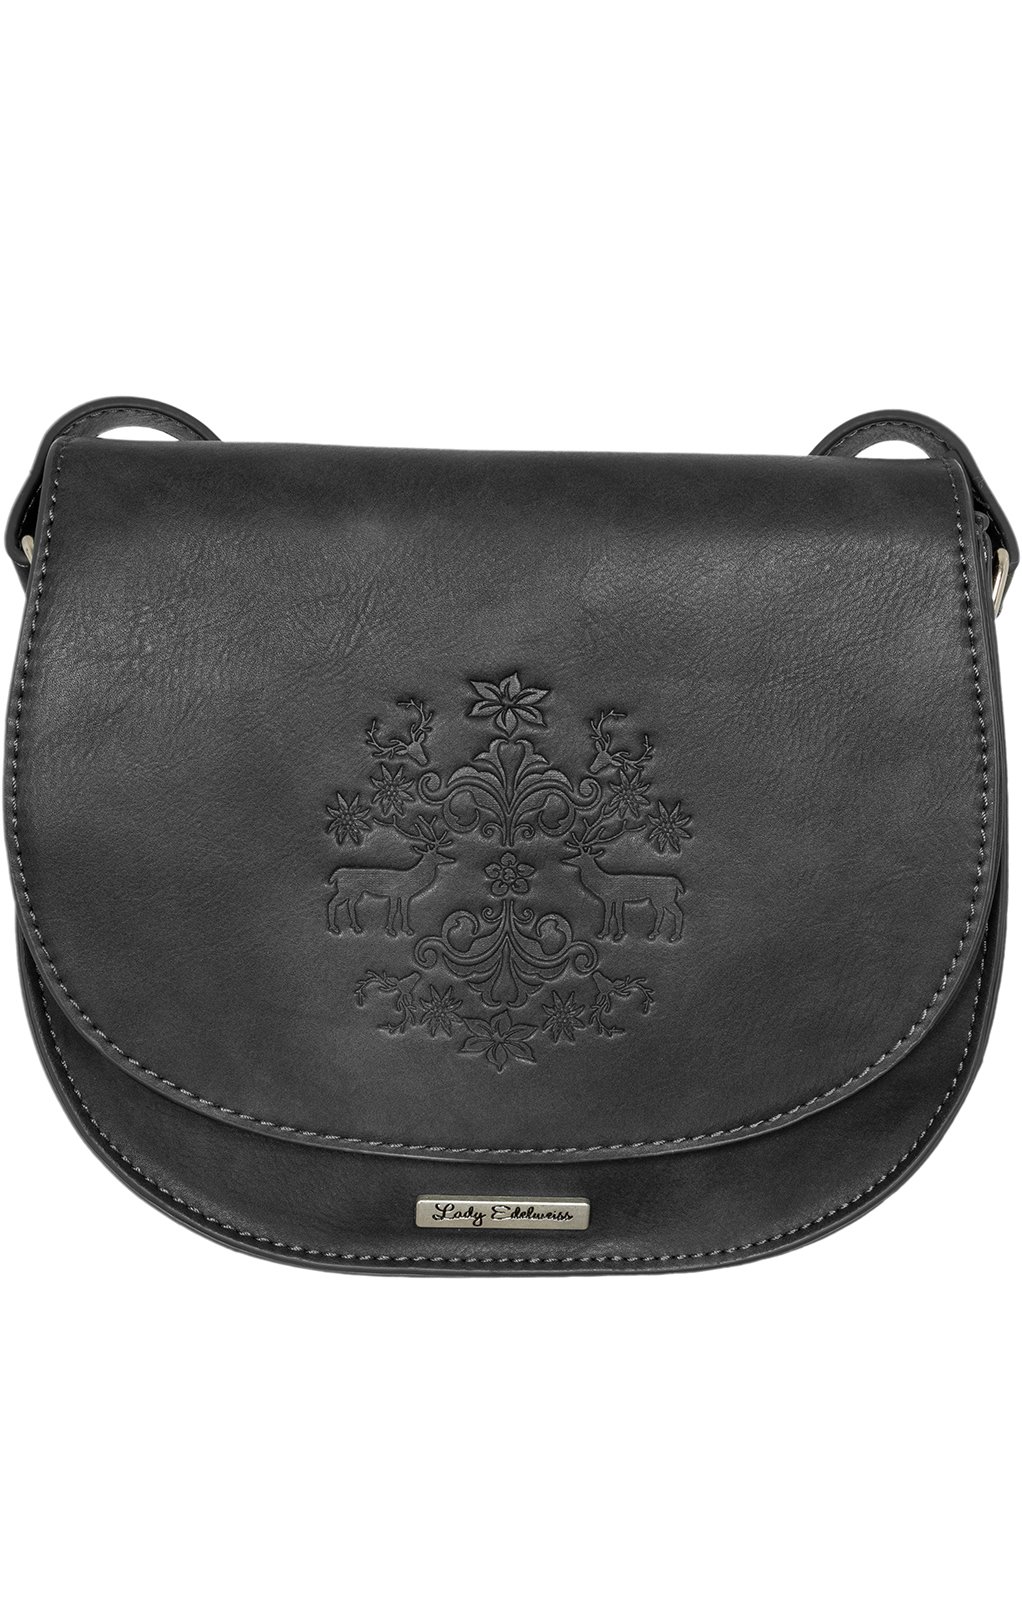 Traditional bag 13102 antique black von Lady Edelweiss